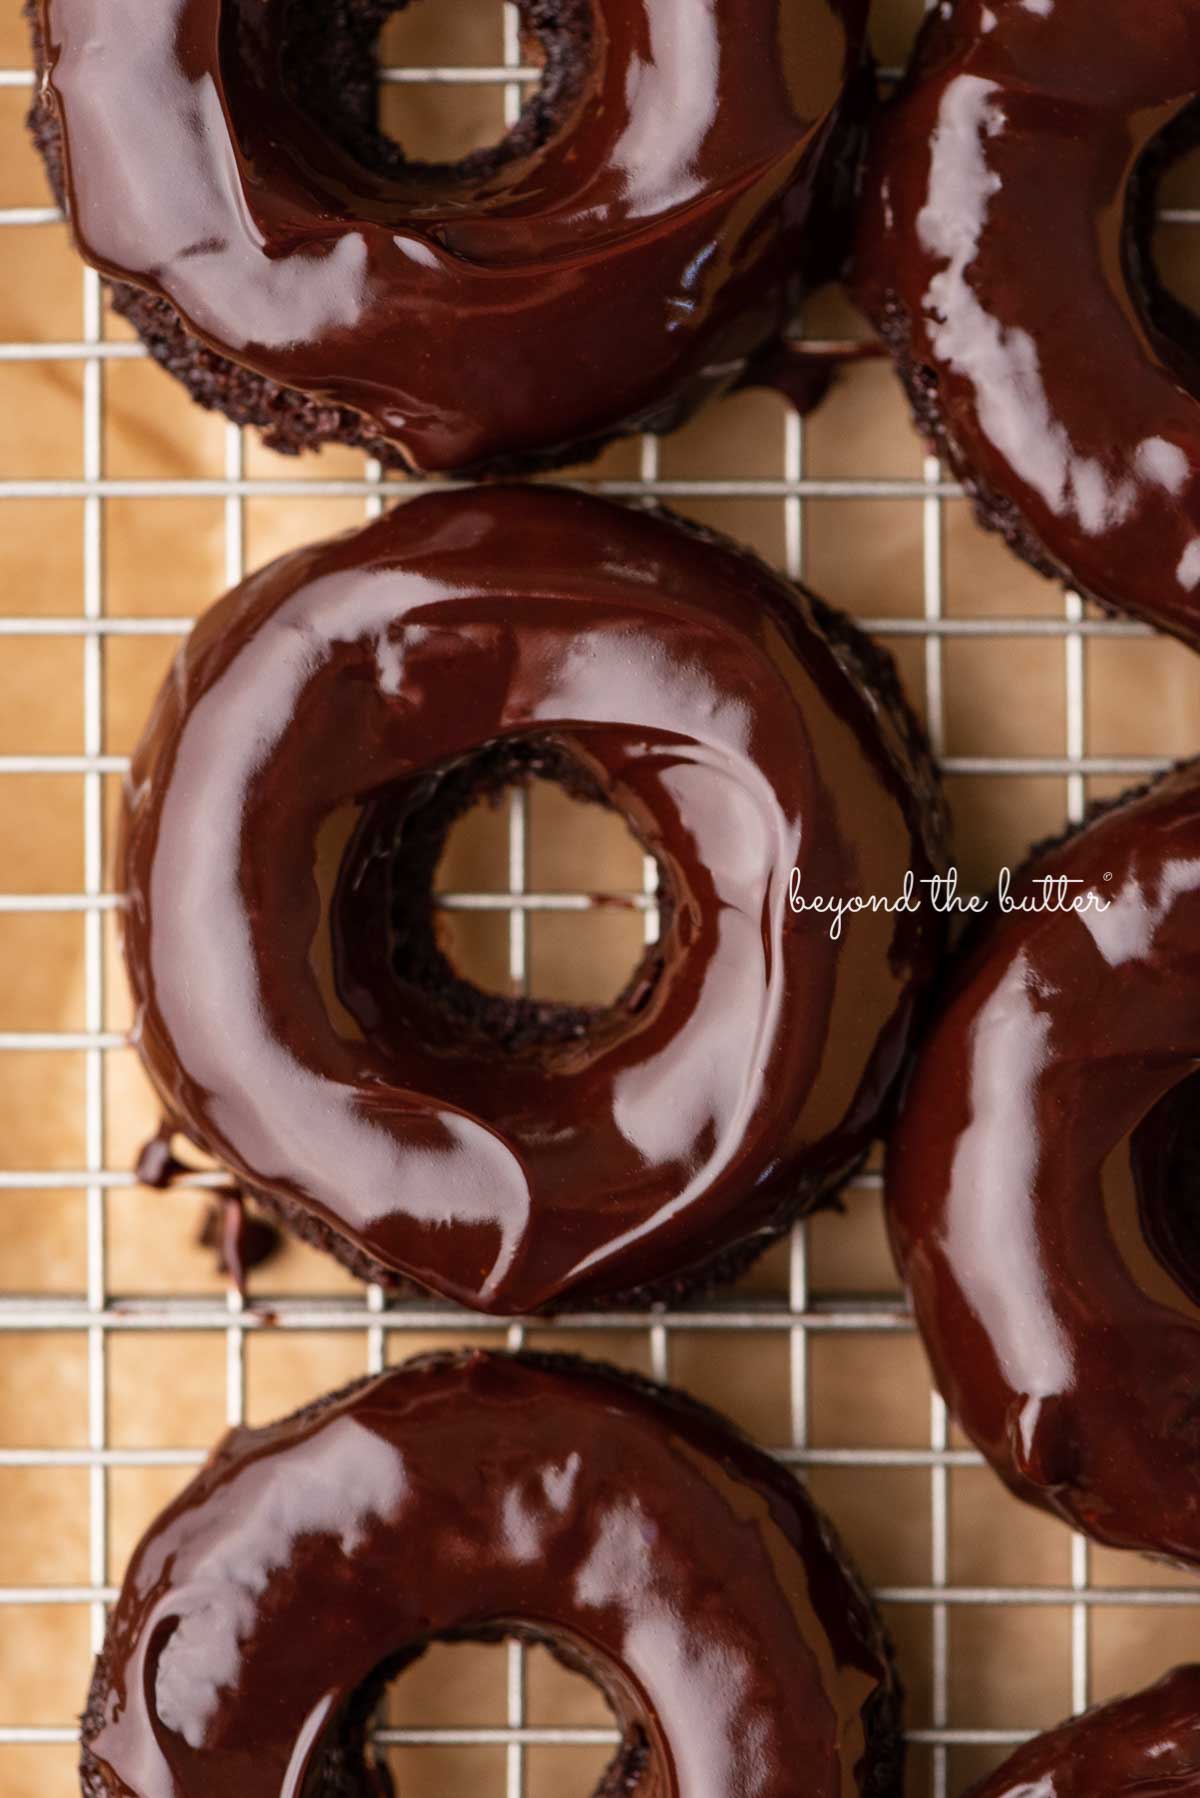 Homemade baked chocolate donuts topped with chocolate ganache glaze on a wire cooling rack.